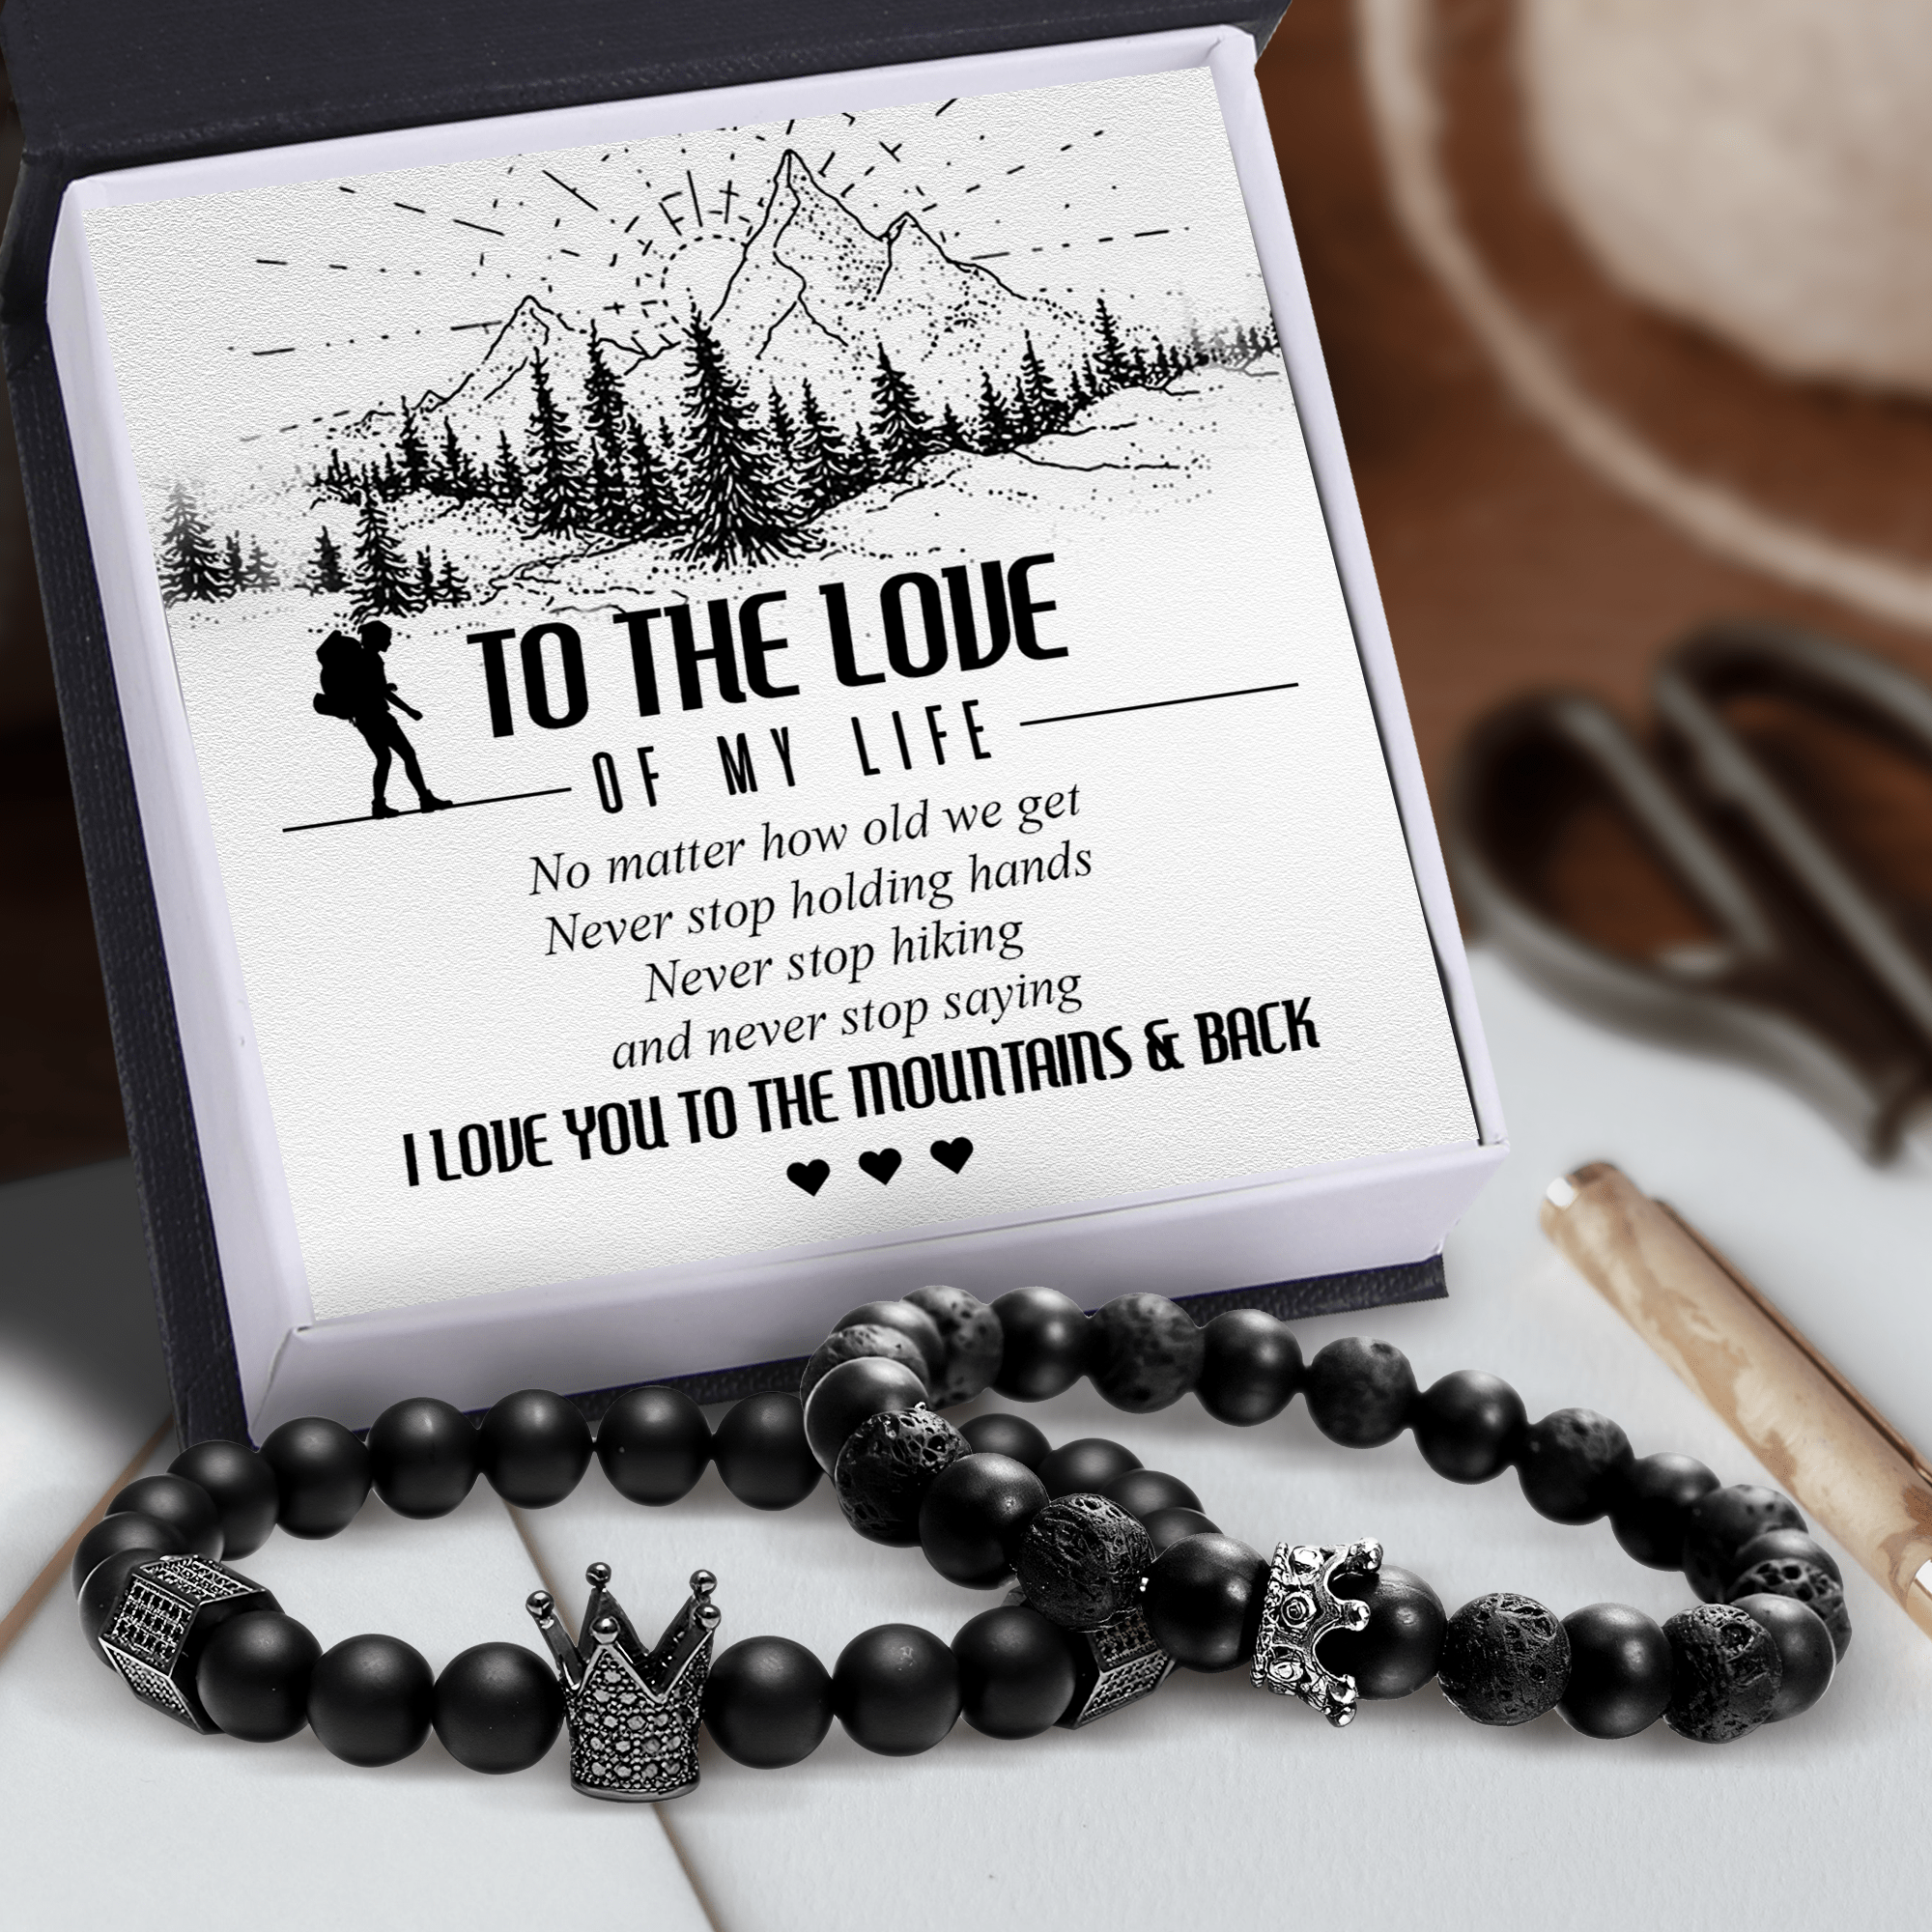 King & Queen Couple Bracelets - Hiking - To The Love Of My Life - I Love You To The Mountains & Back - Gbae13010